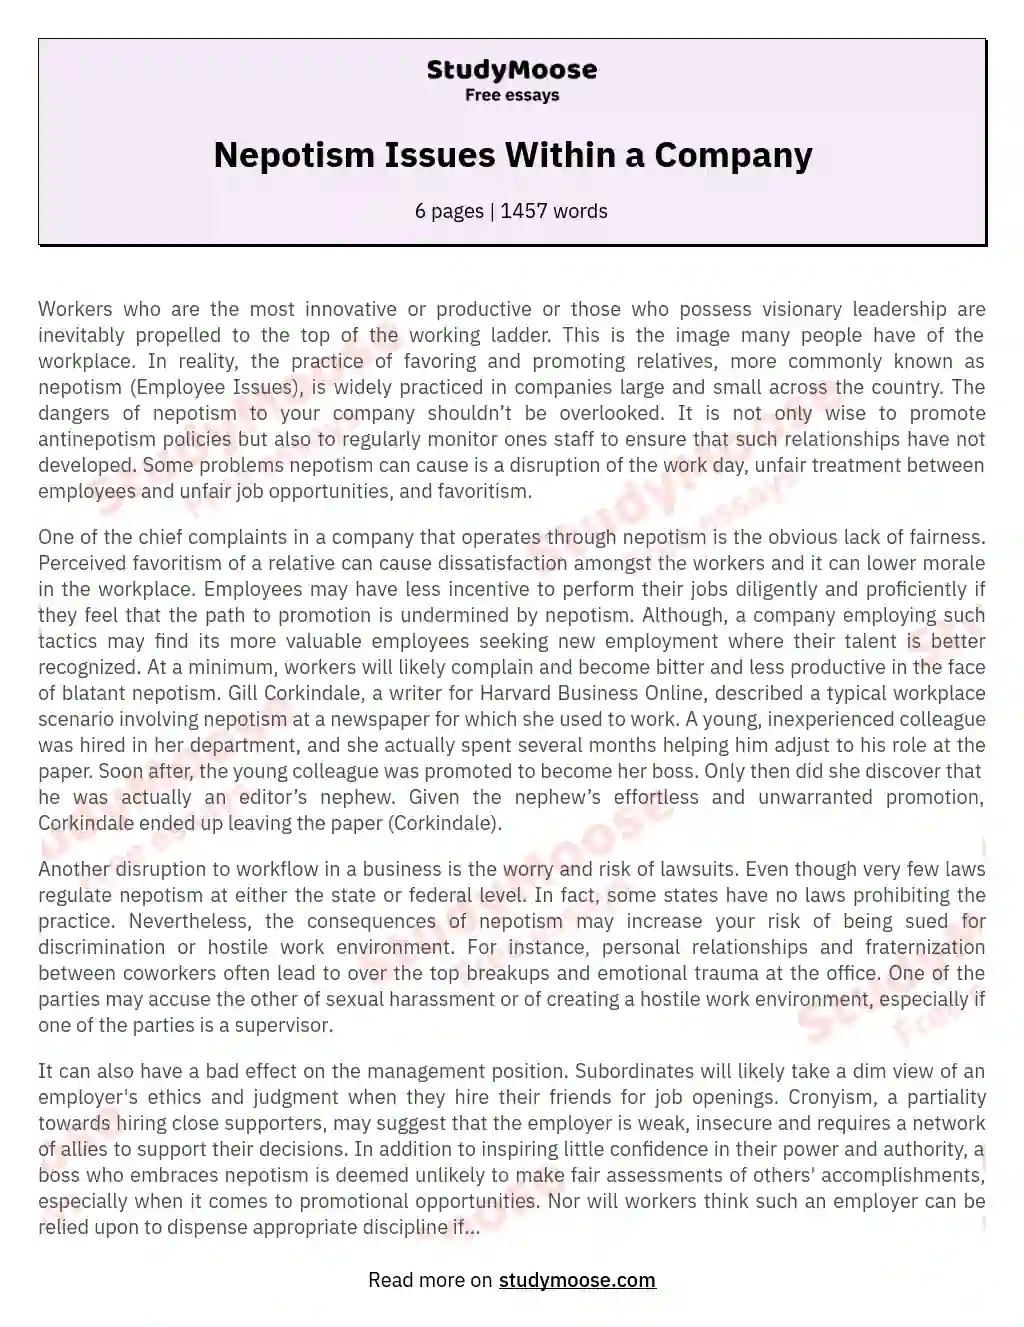 Nepotism Issues Within a Company essay